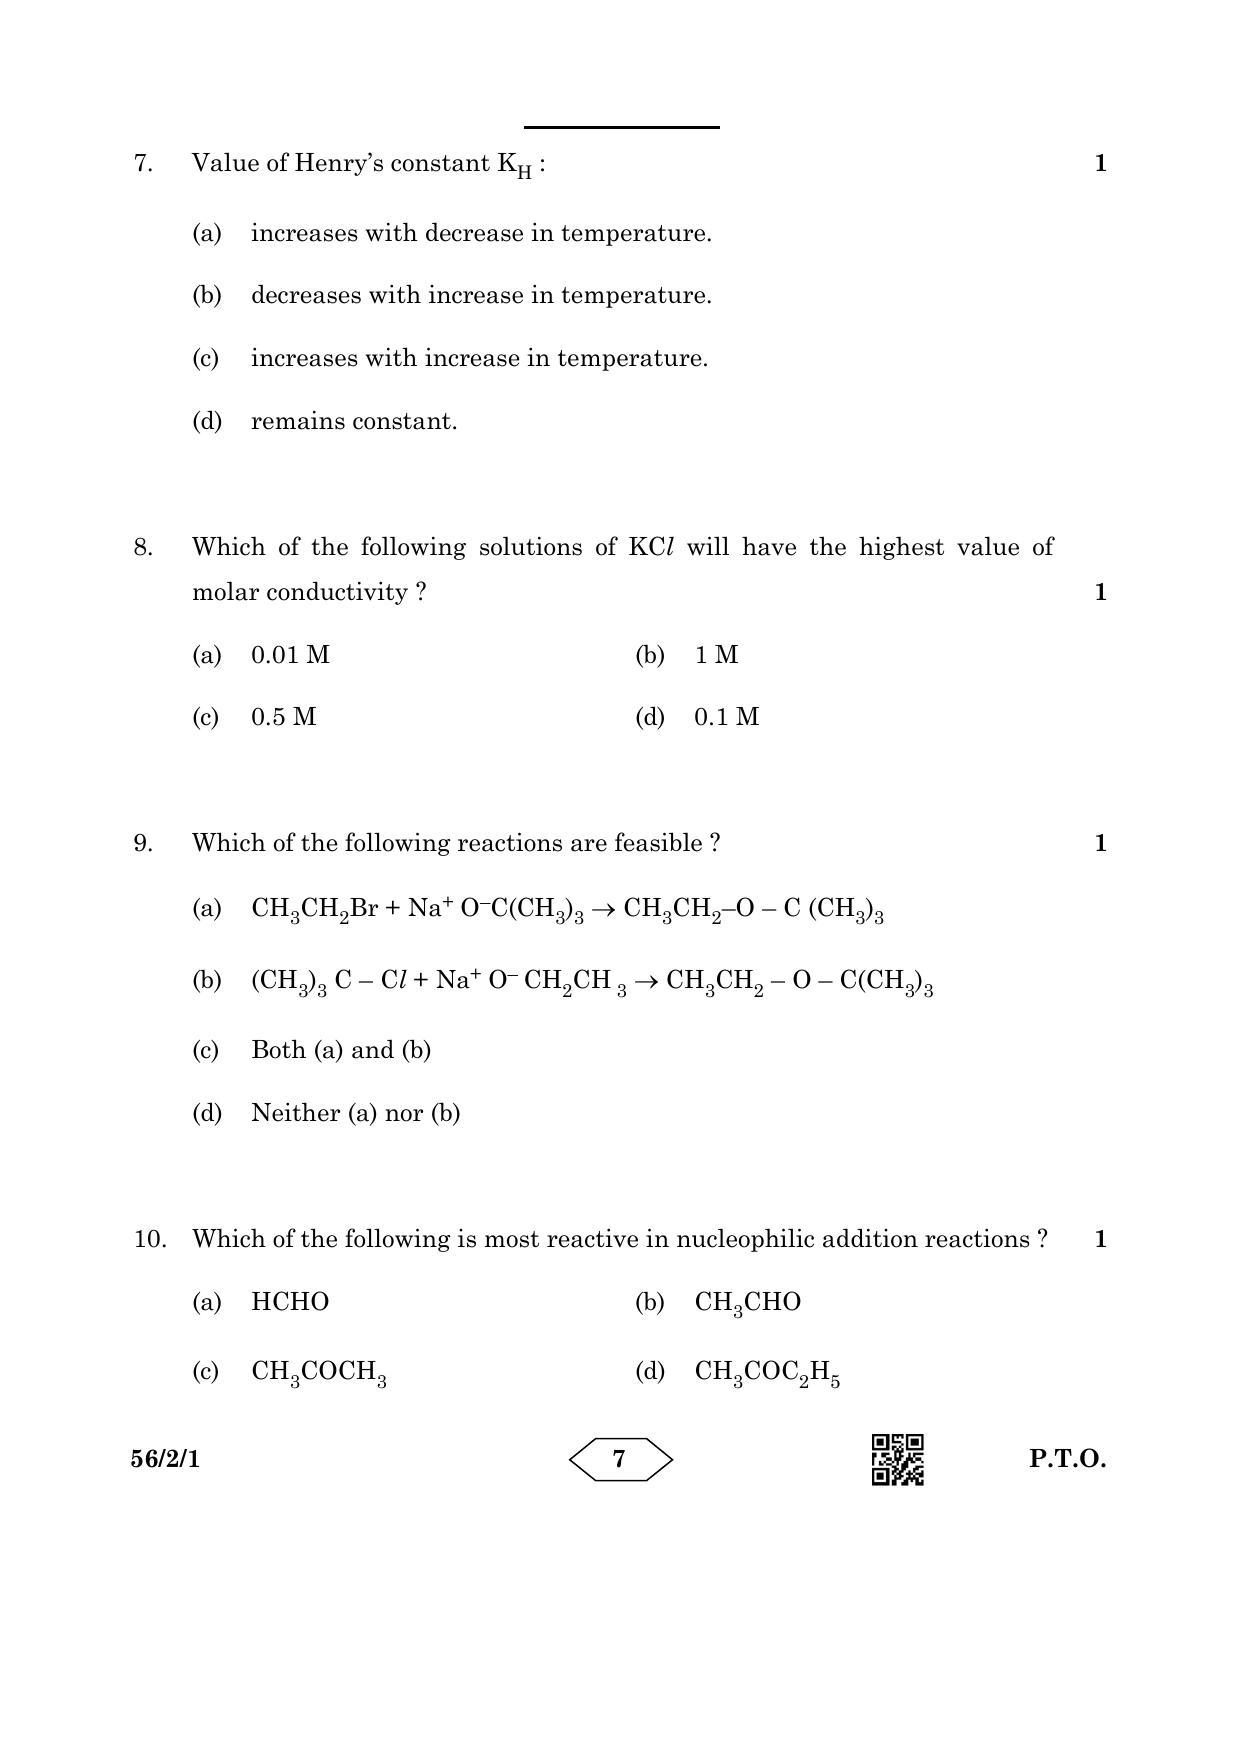 CBSE Class 12 56-2-1 Chemistry 2023 Question Paper - Page 7